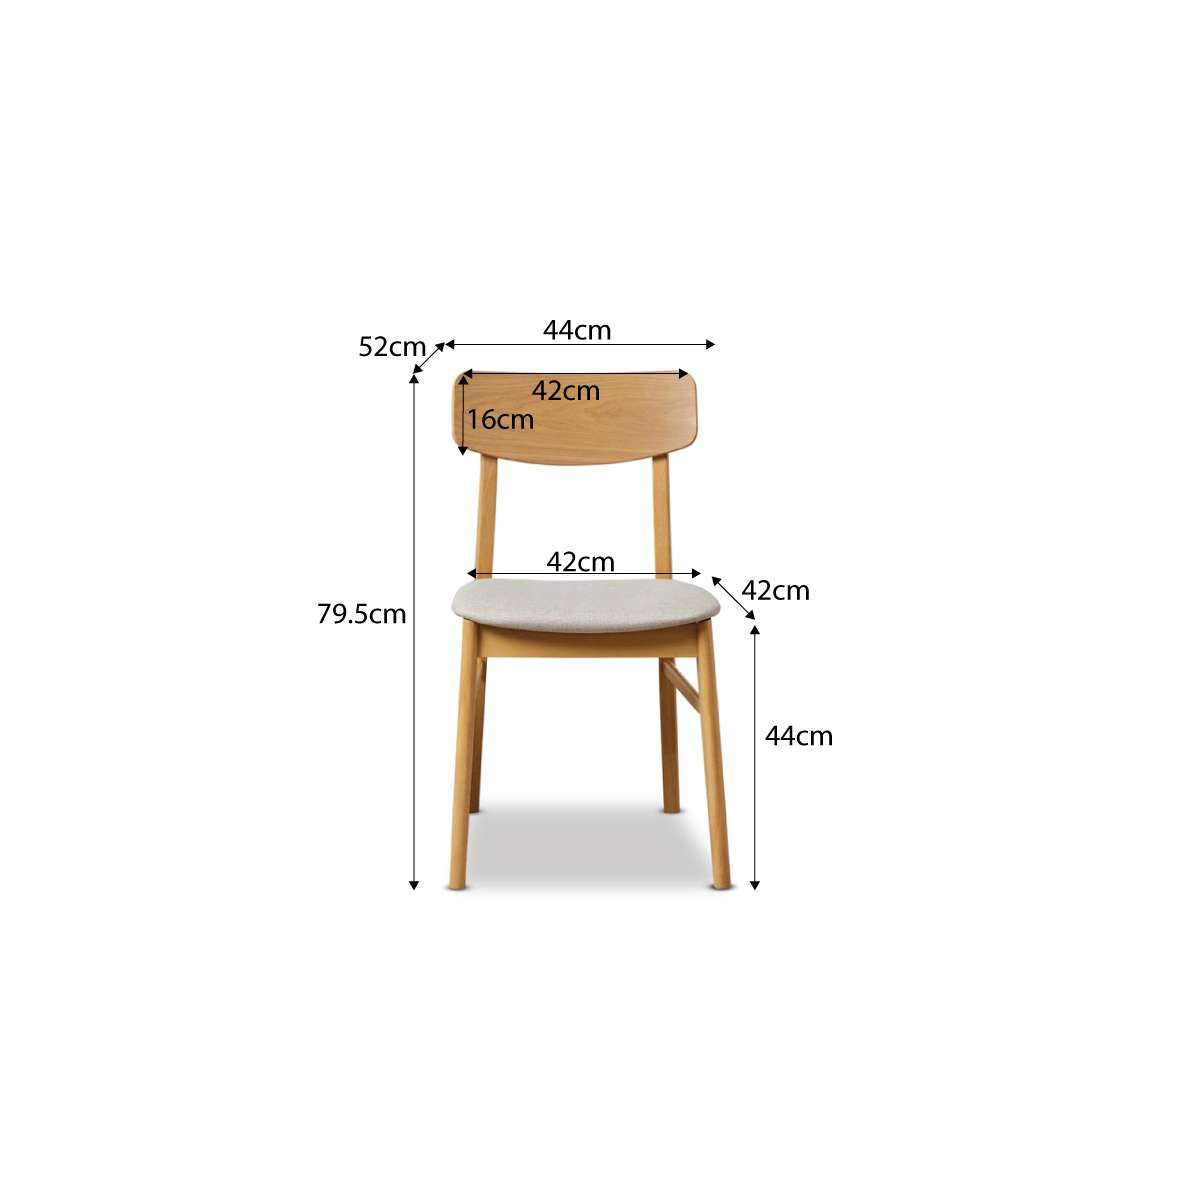 Leon Dining Chair - Set of Two - Natural